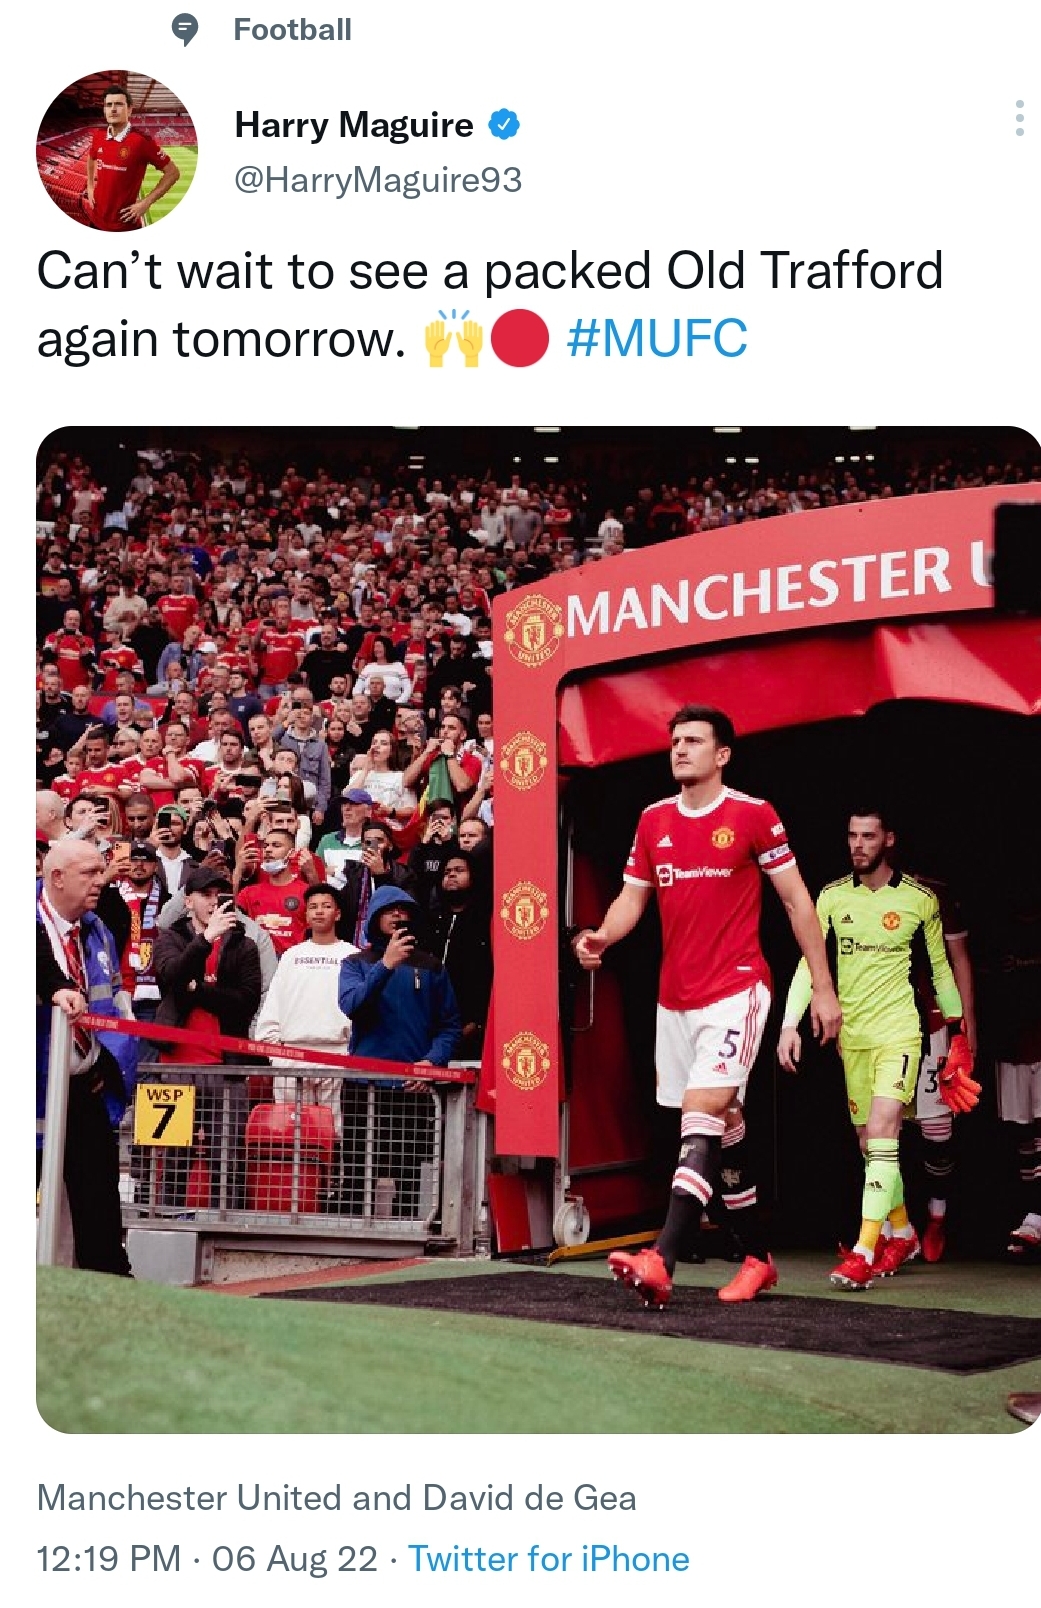 Maguire’s latest tweet angers Manchester United Fans